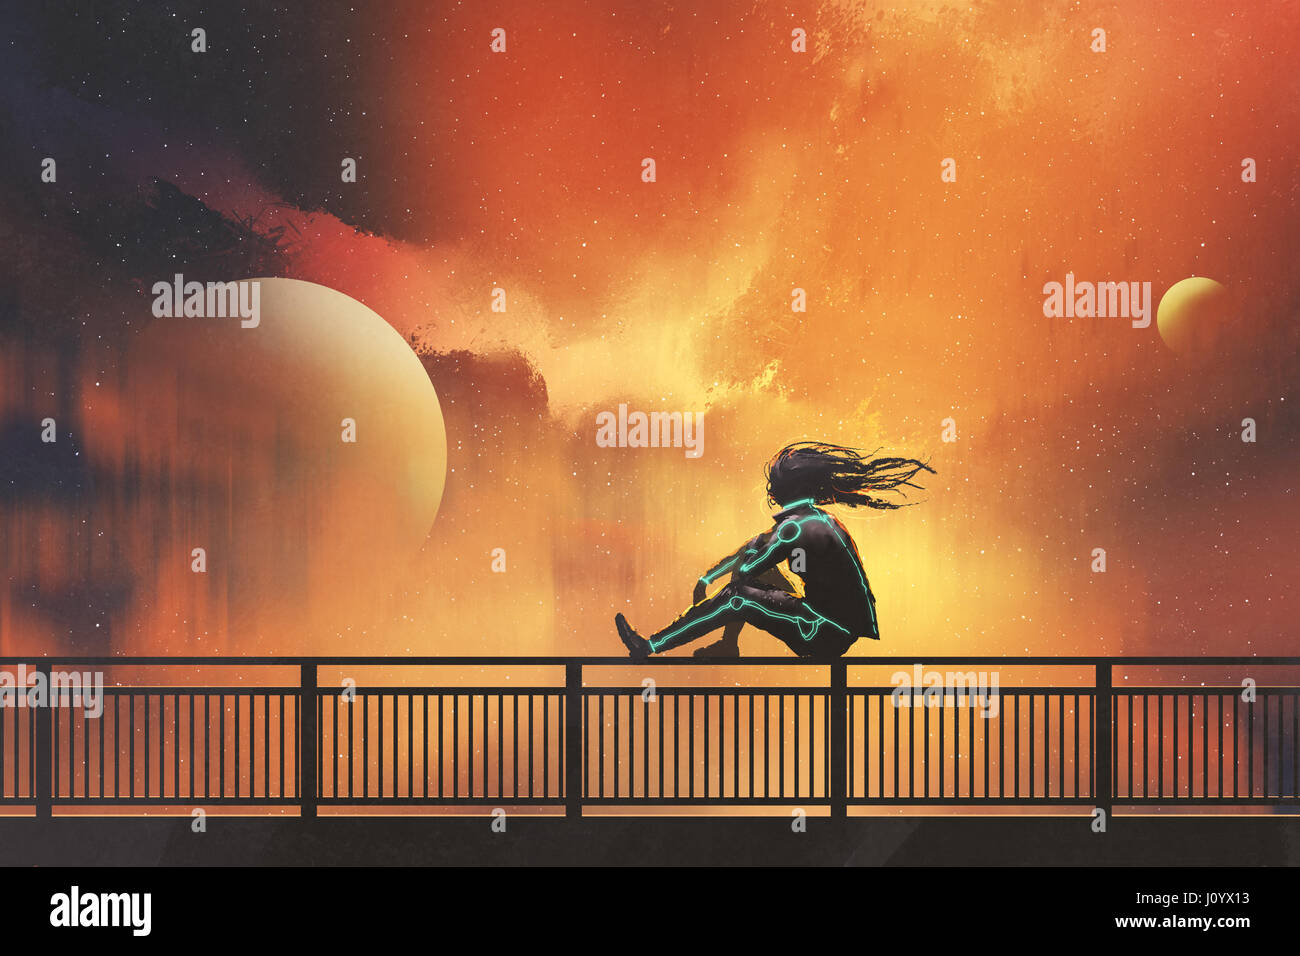 woman in futuristic suit sitting on railing looking at beautiful night sky, illustration painting Stock Photo